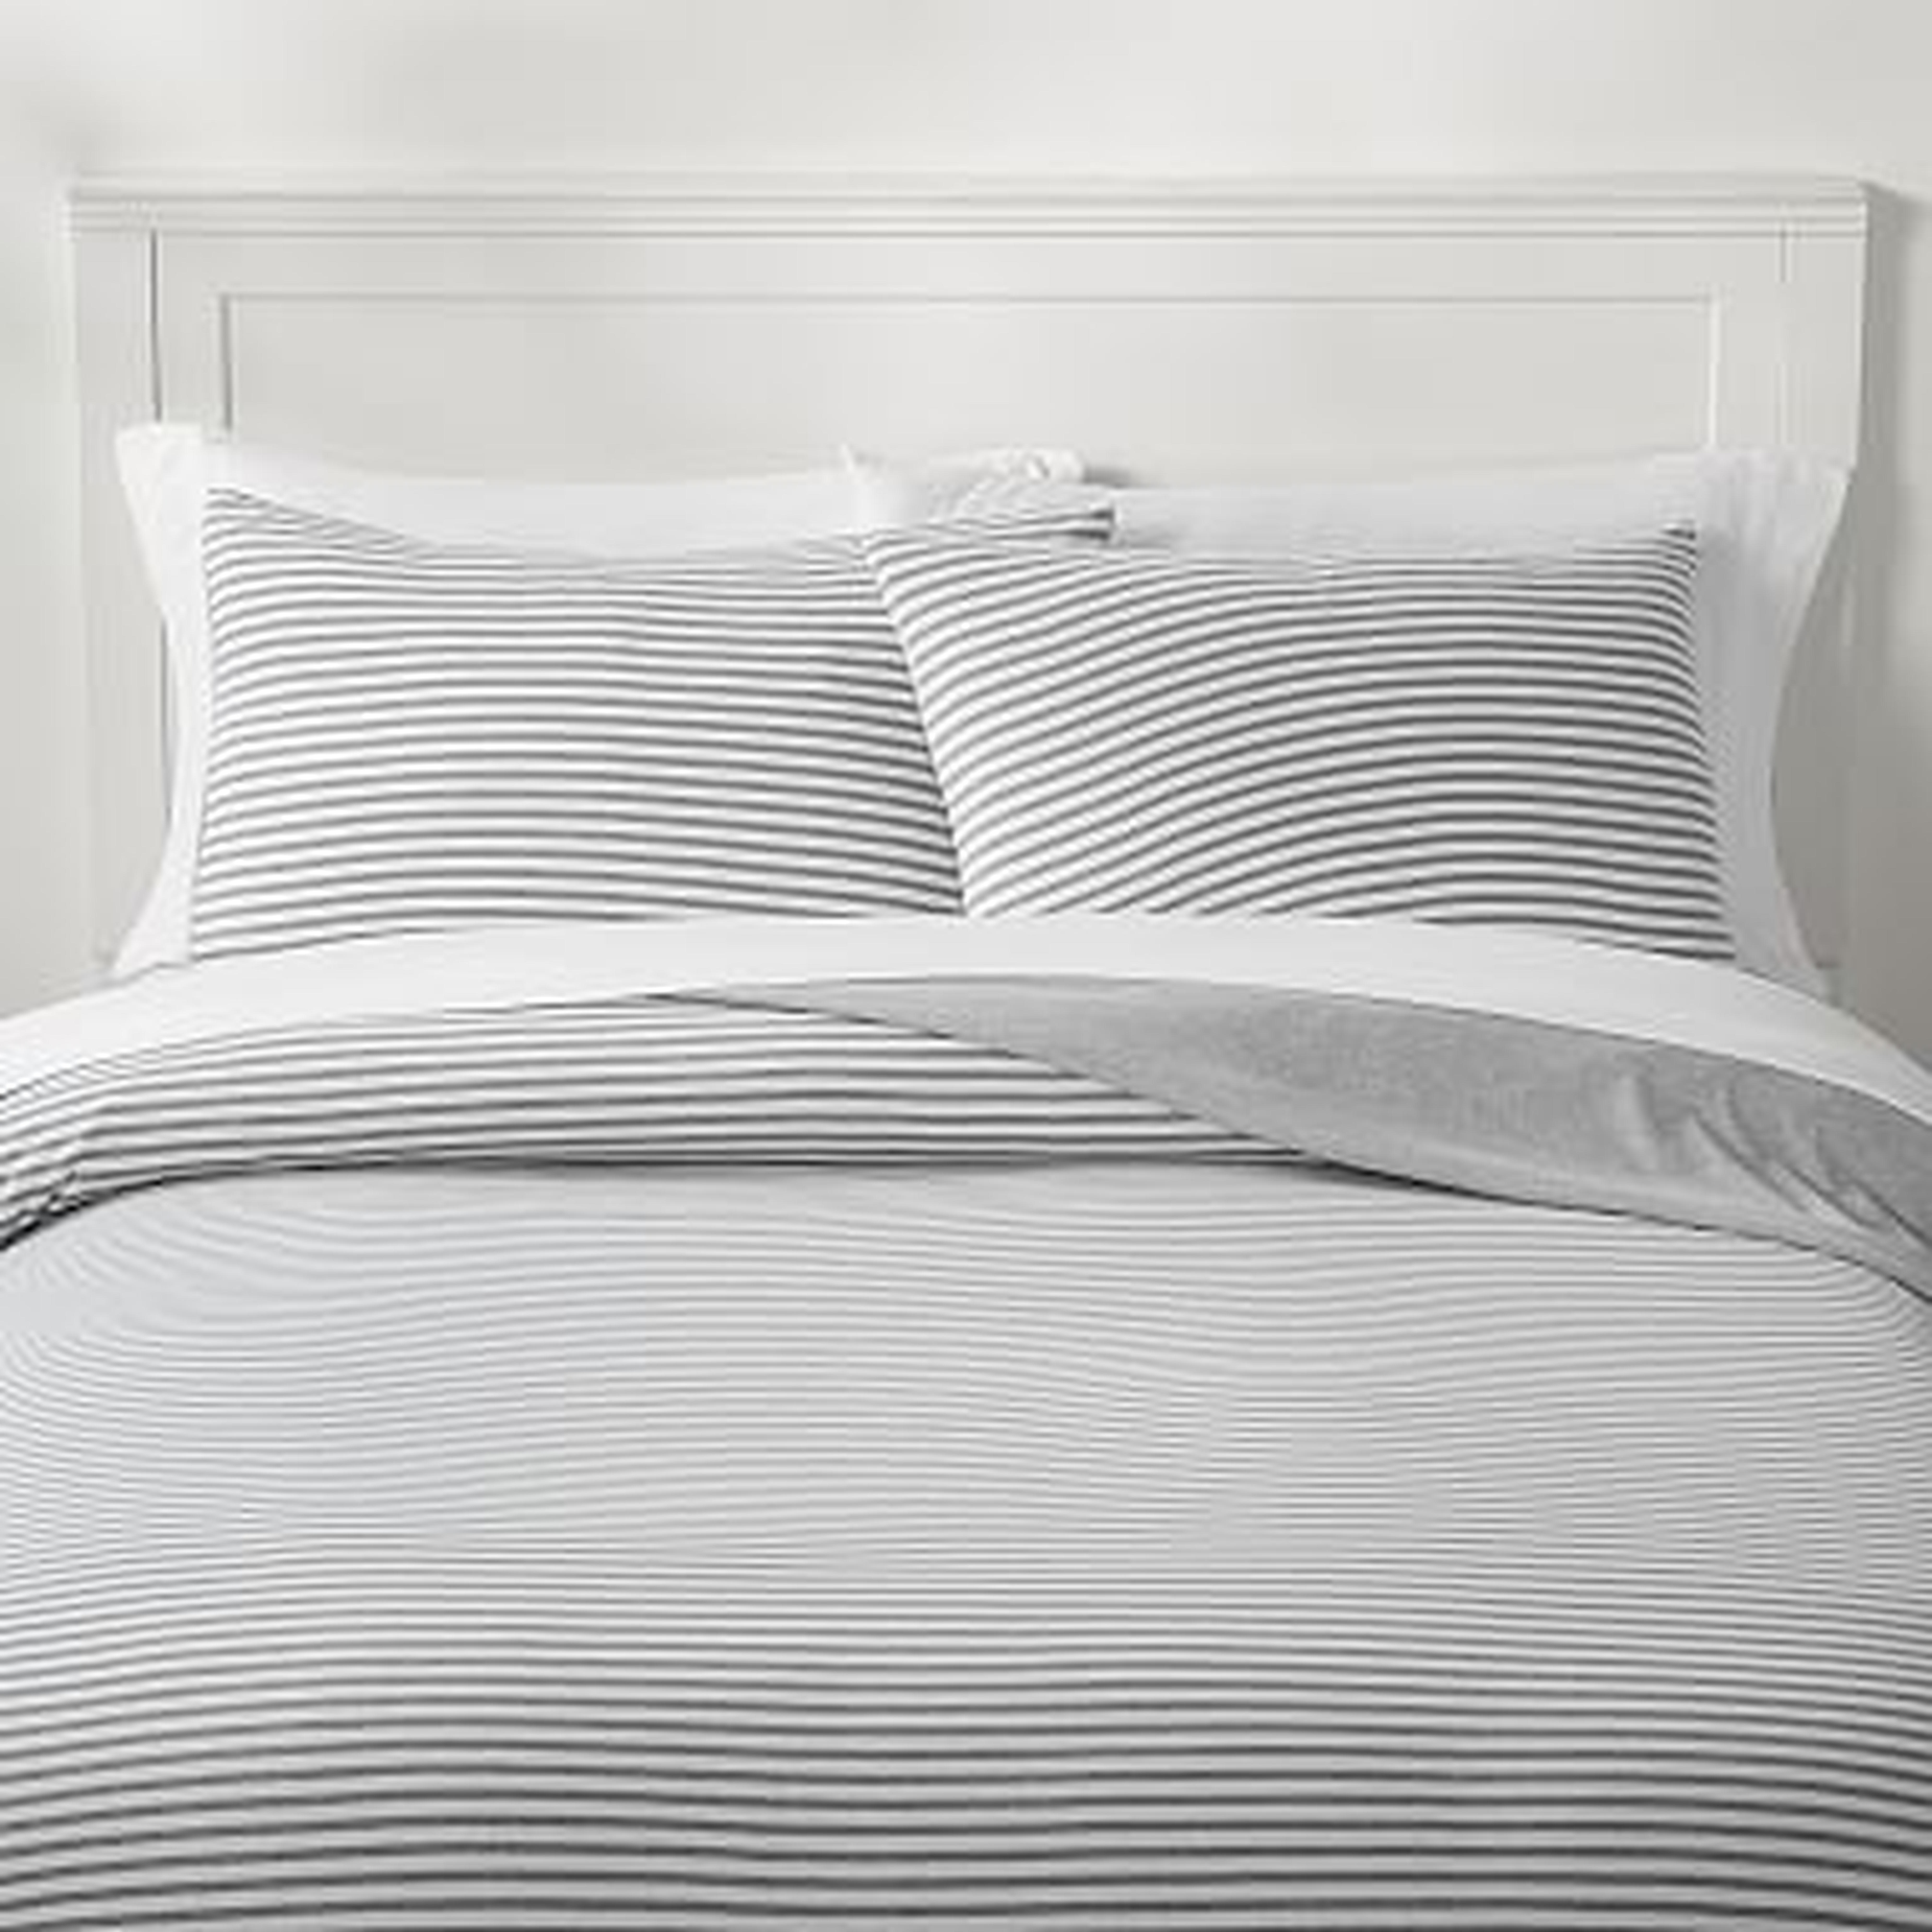 Favorite Tee Striped Reversible Duvet Cover, Twin/Twin XL, Heathered Gray/White - Pottery Barn Teen